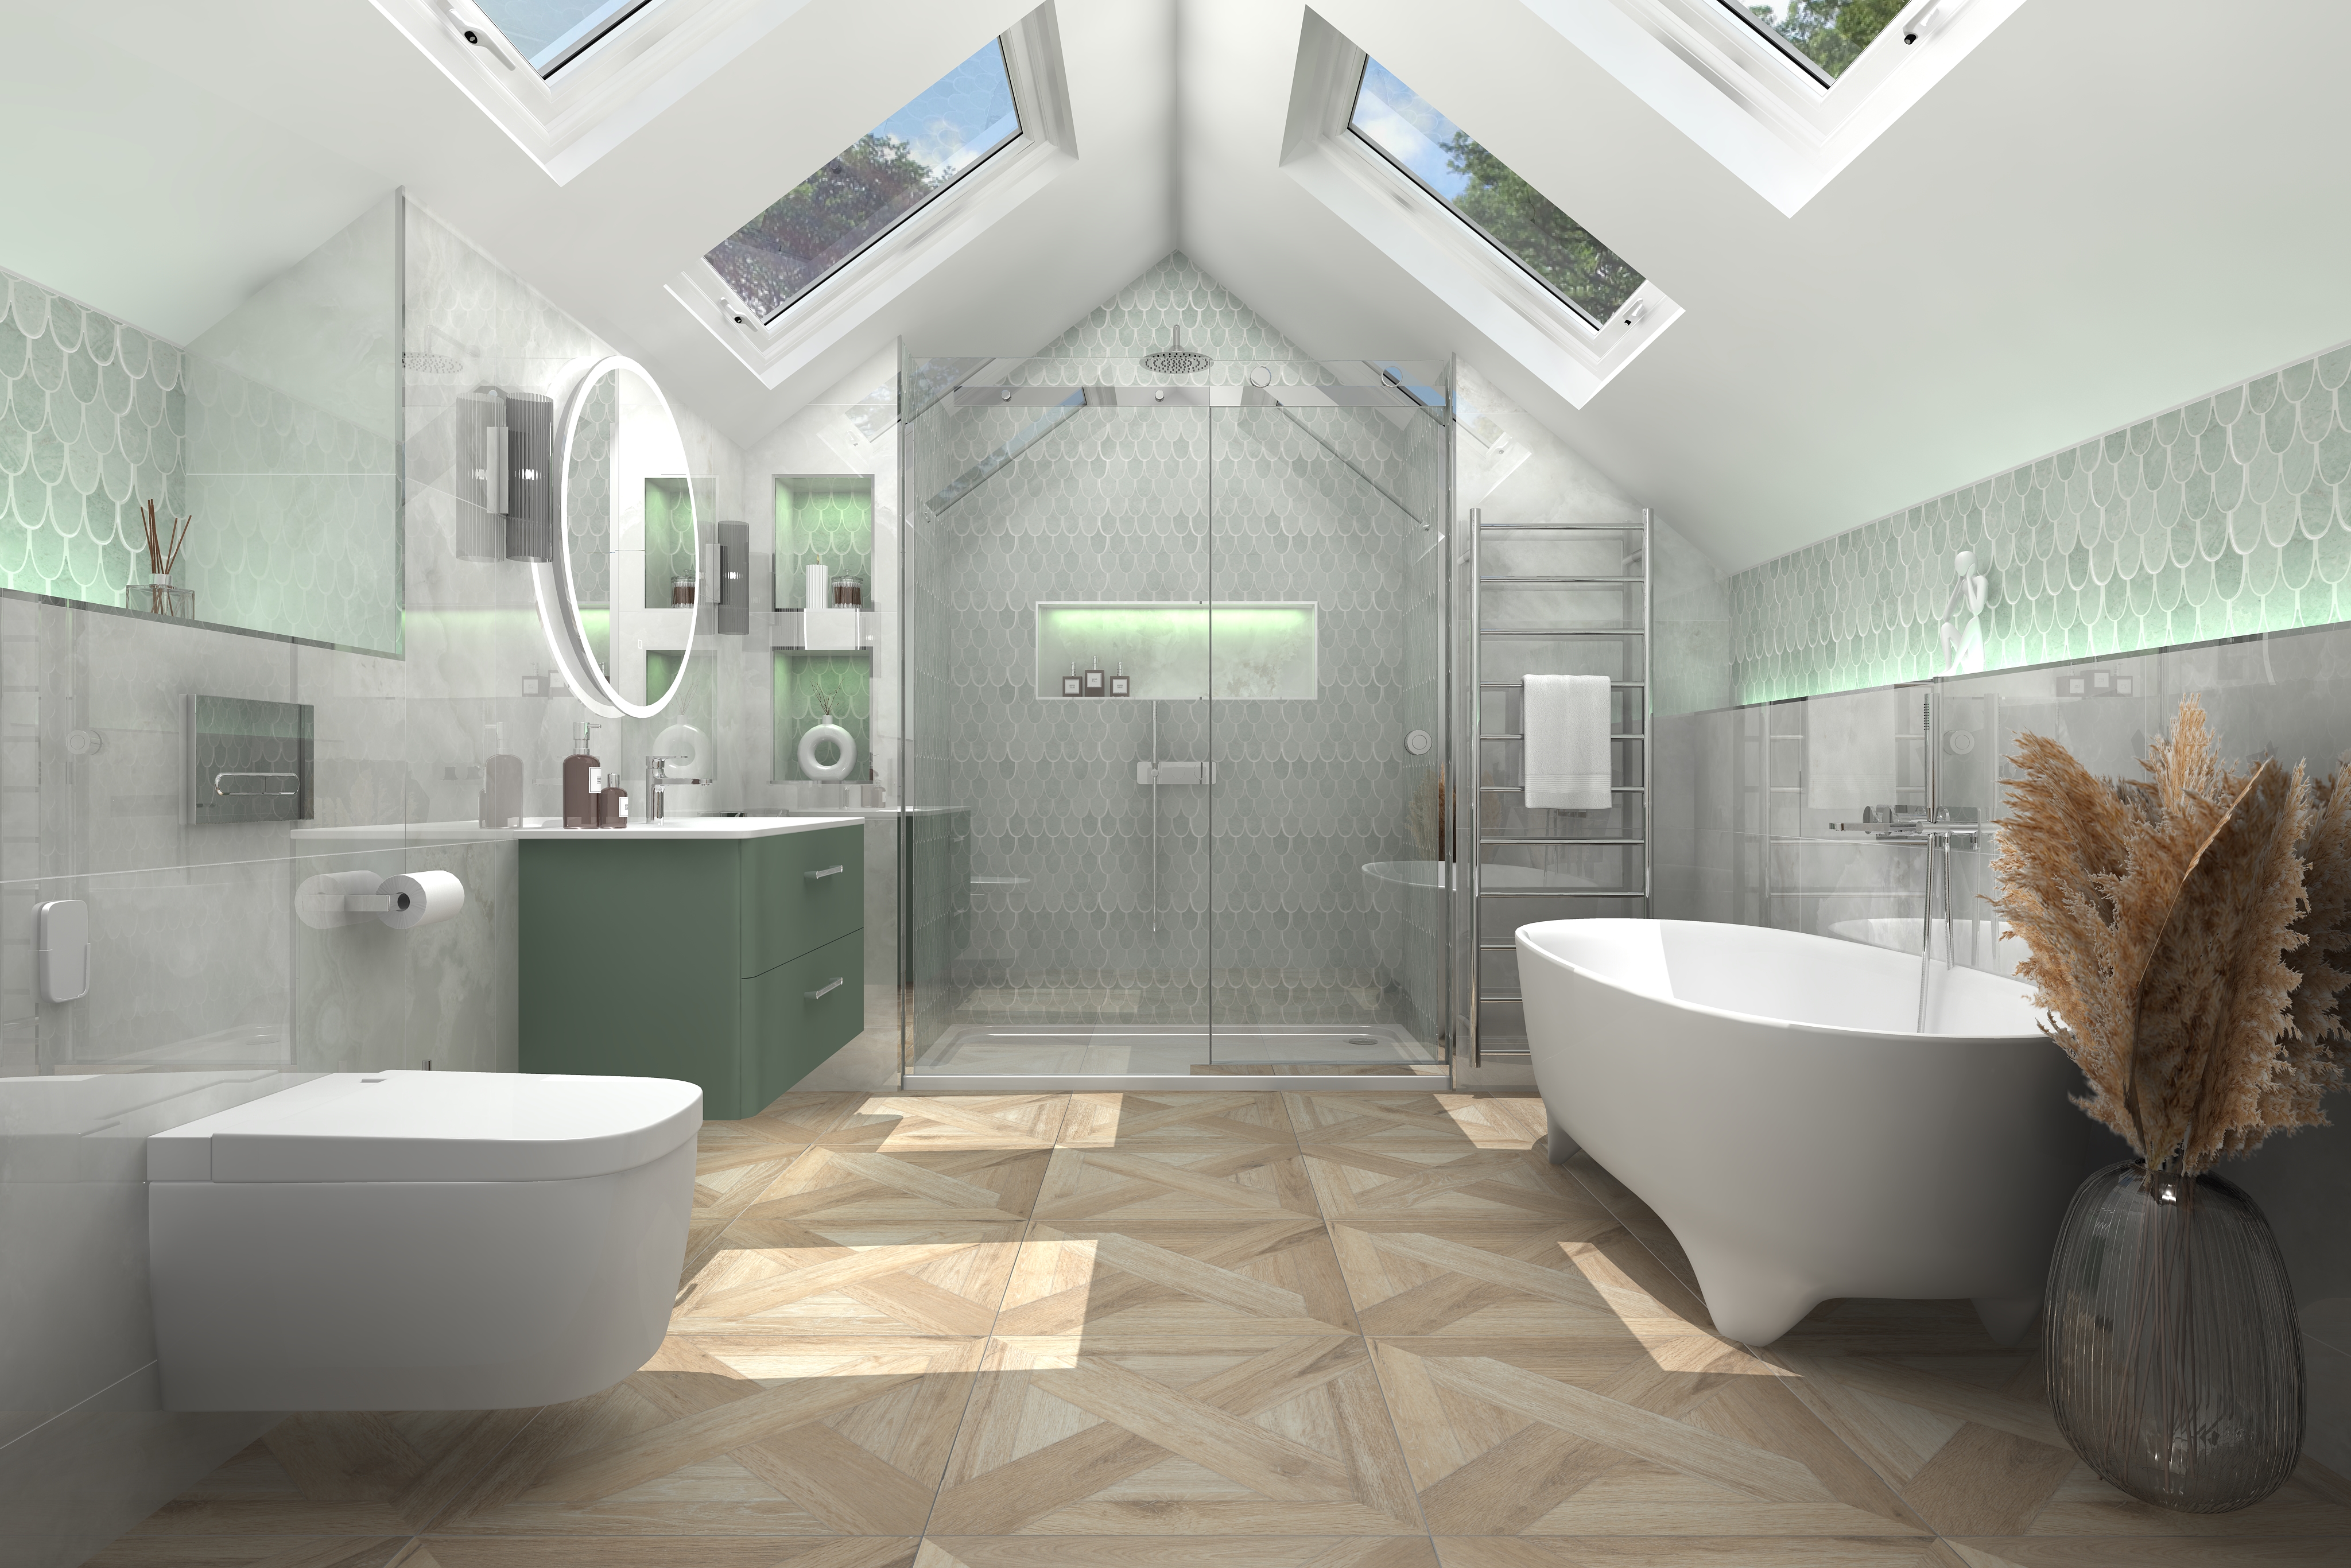 Digital lifestyle image of the Virgo inspired bathroom, with wooden effect floor tiles, marble effect wall tiles, wall mounted toilet, wall mounted green washbasin vanity unit, glass shower enclosure, freestanding bath with contemporary feet, chrome radiator and four skylights